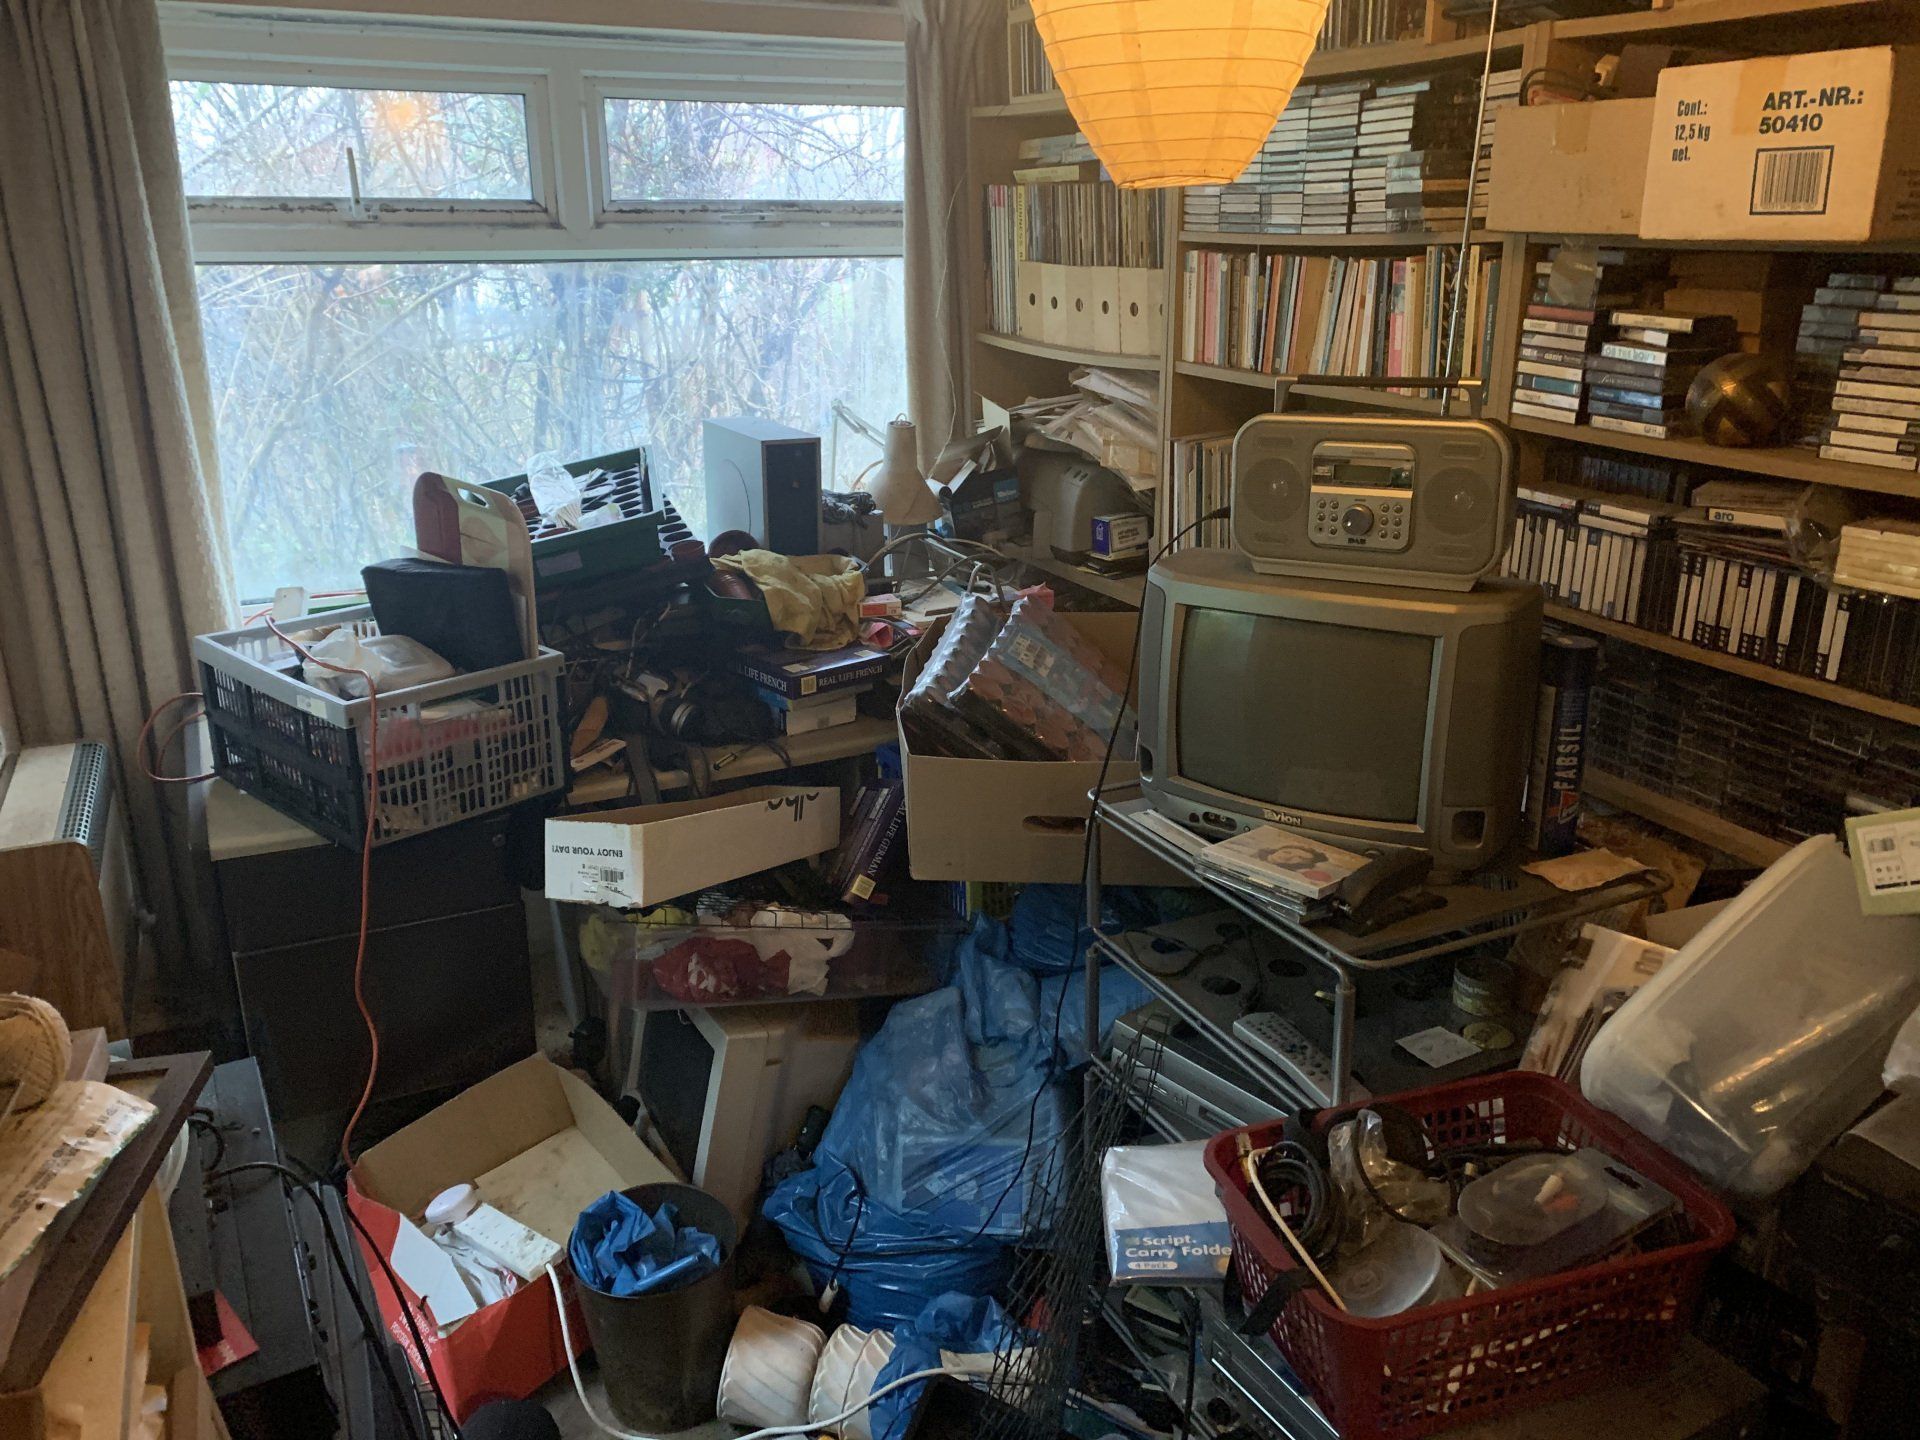 A very cluttered room